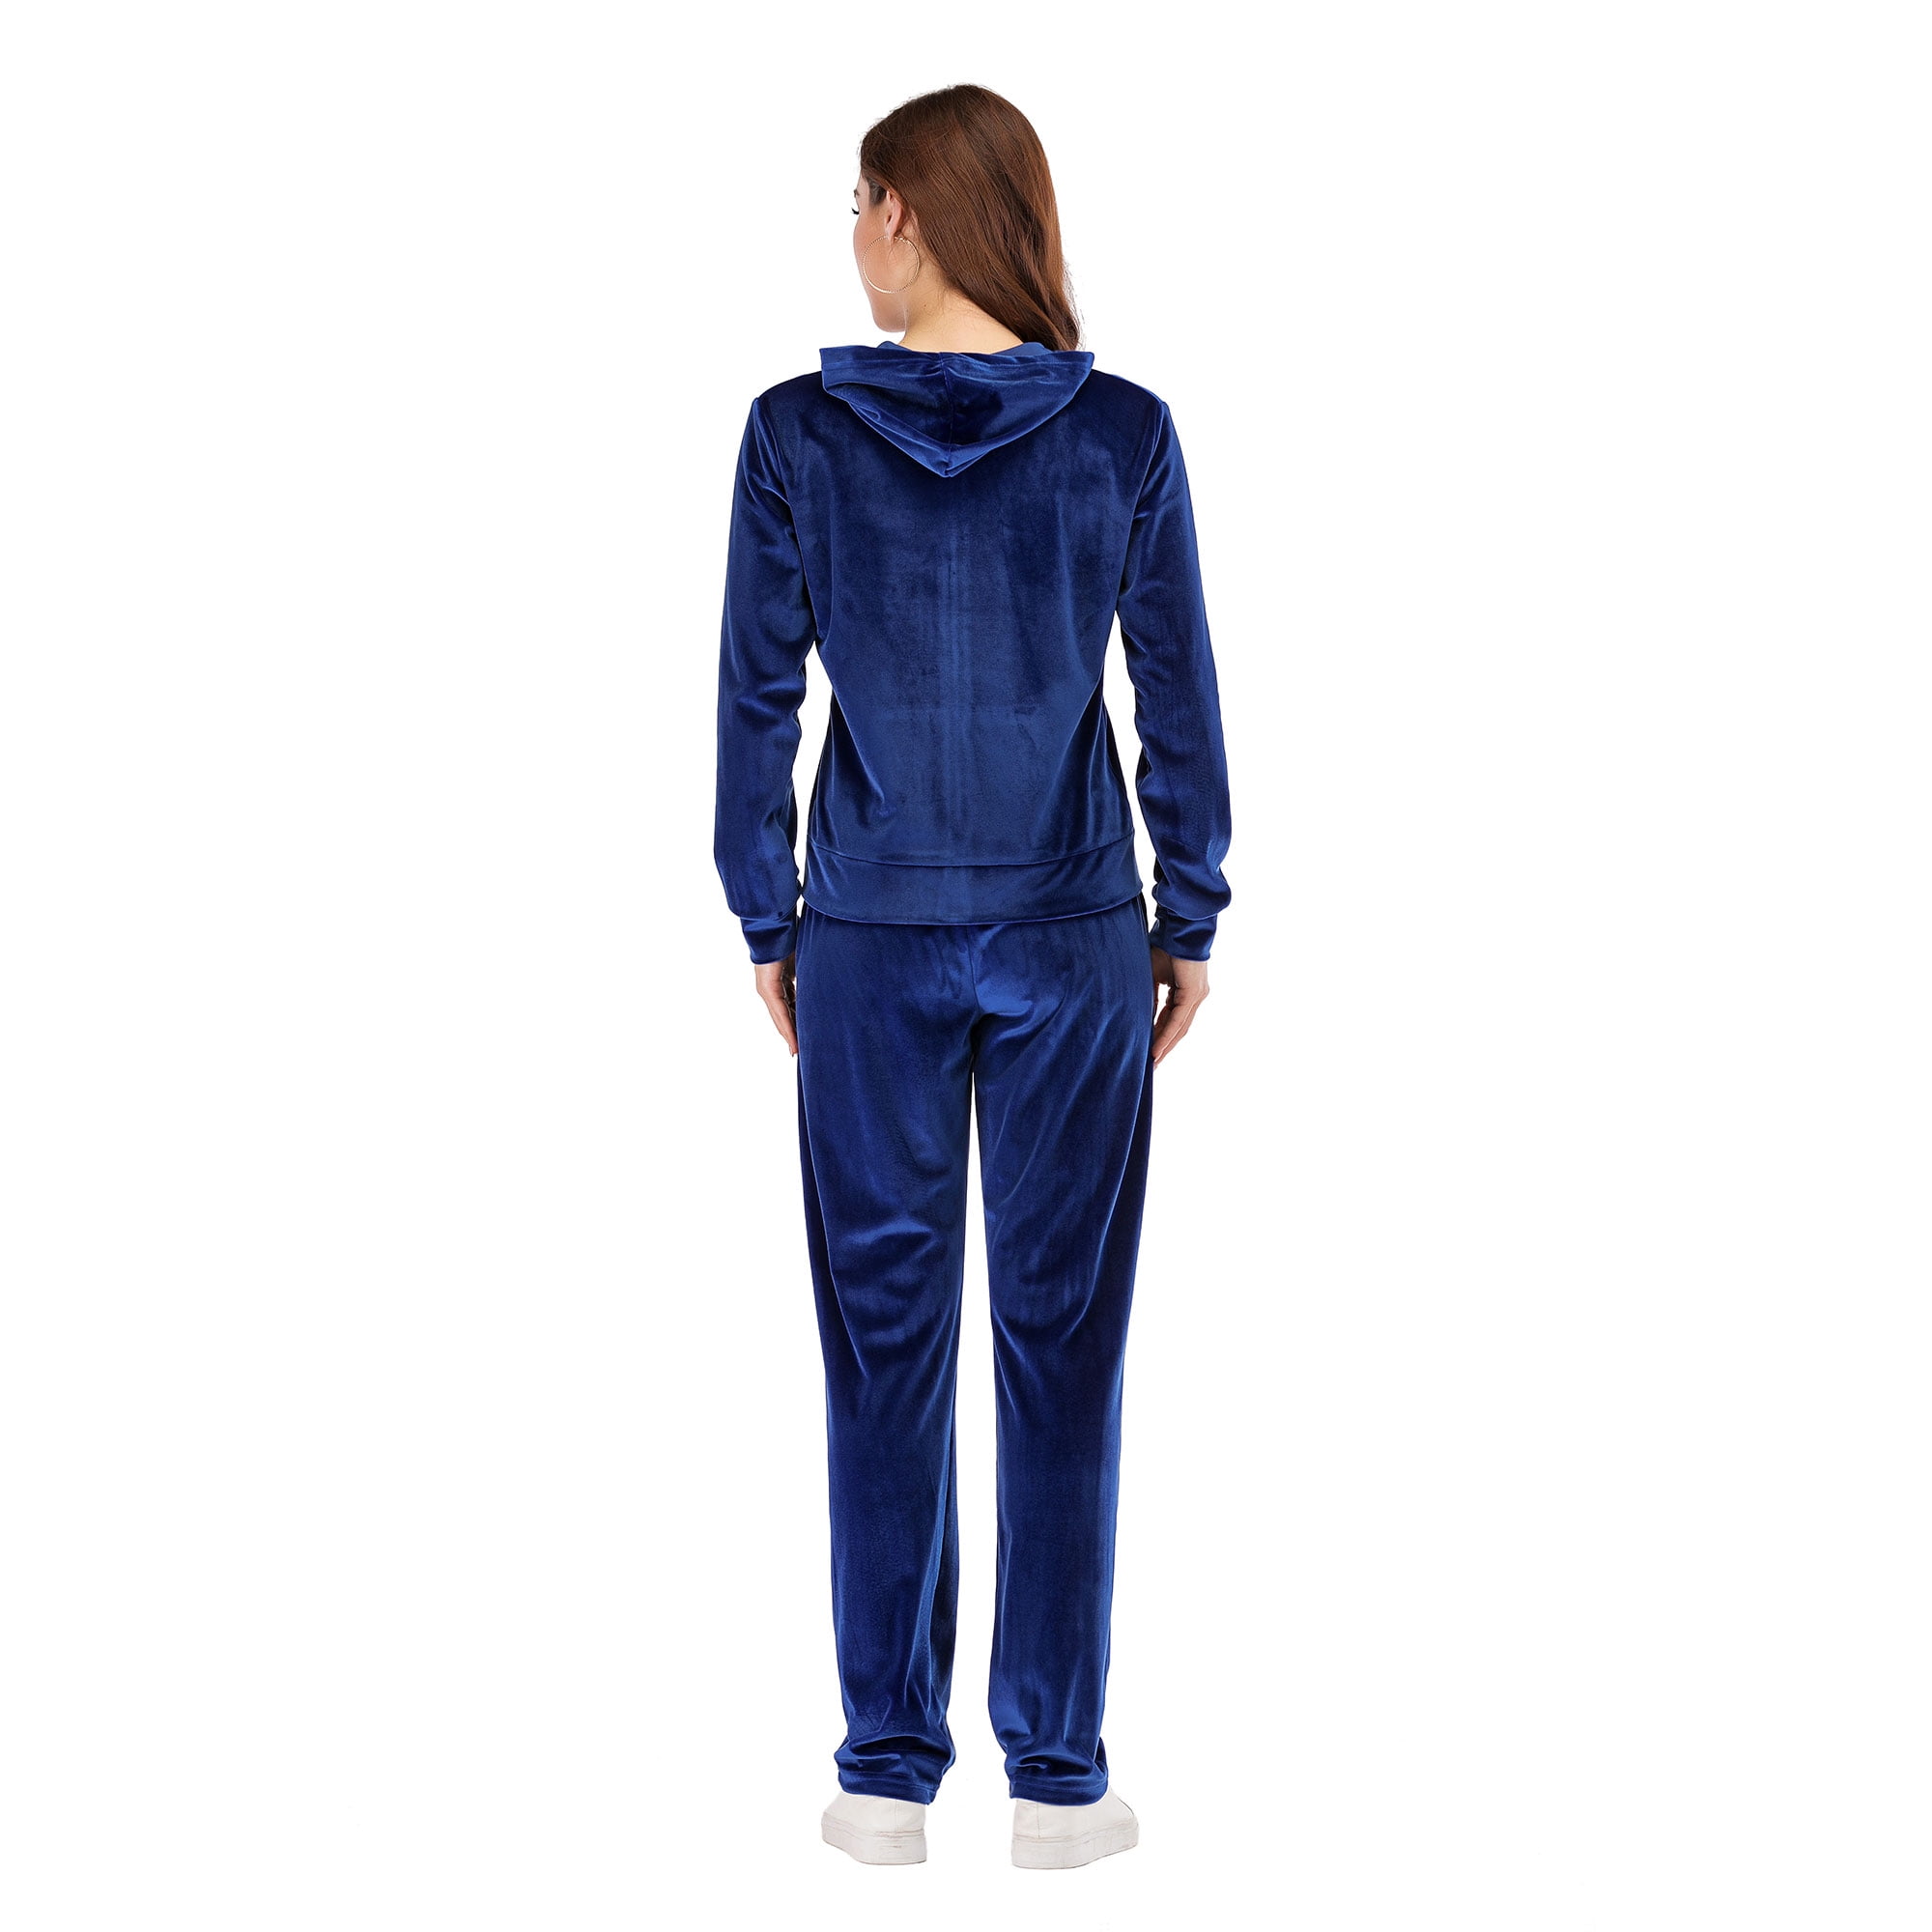 Velour Tracksuit Womens Sweatsuit Set, Athletic Set Zip Up Hoodies and  Sweatpants Outfits with Pockets, Blue, S 